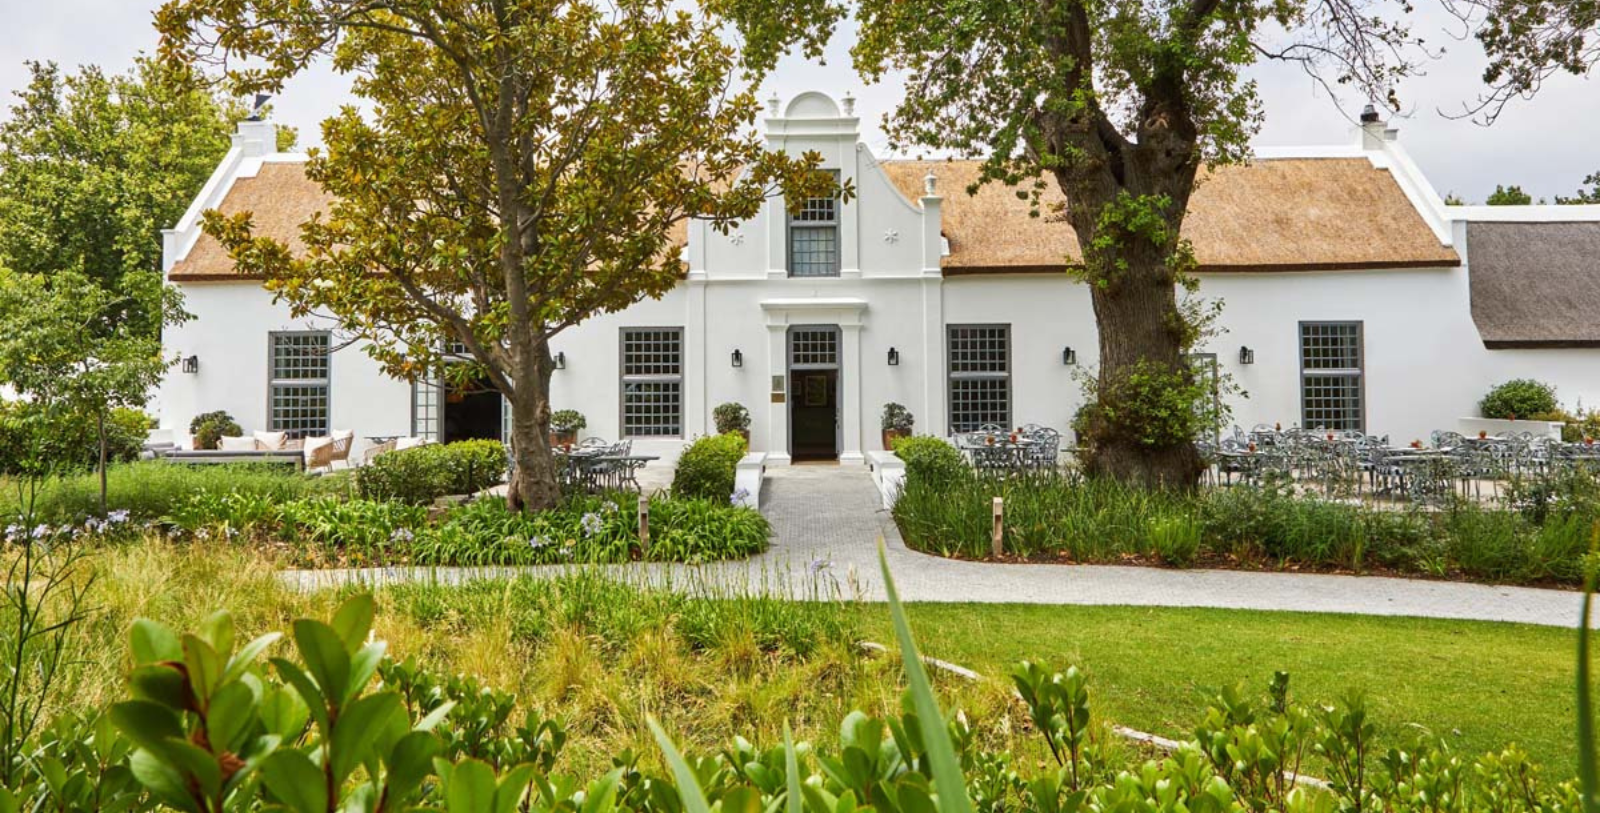 Image of hotel exterior Erinvale Estate Hotel & Spa, 1666, Member of Historic Hotels Worldwide, Somerset West, South Africa, Special Offers, Discounted Rates, Families, Romantic Escape, Honeymoons, Anniversaries, Reunions